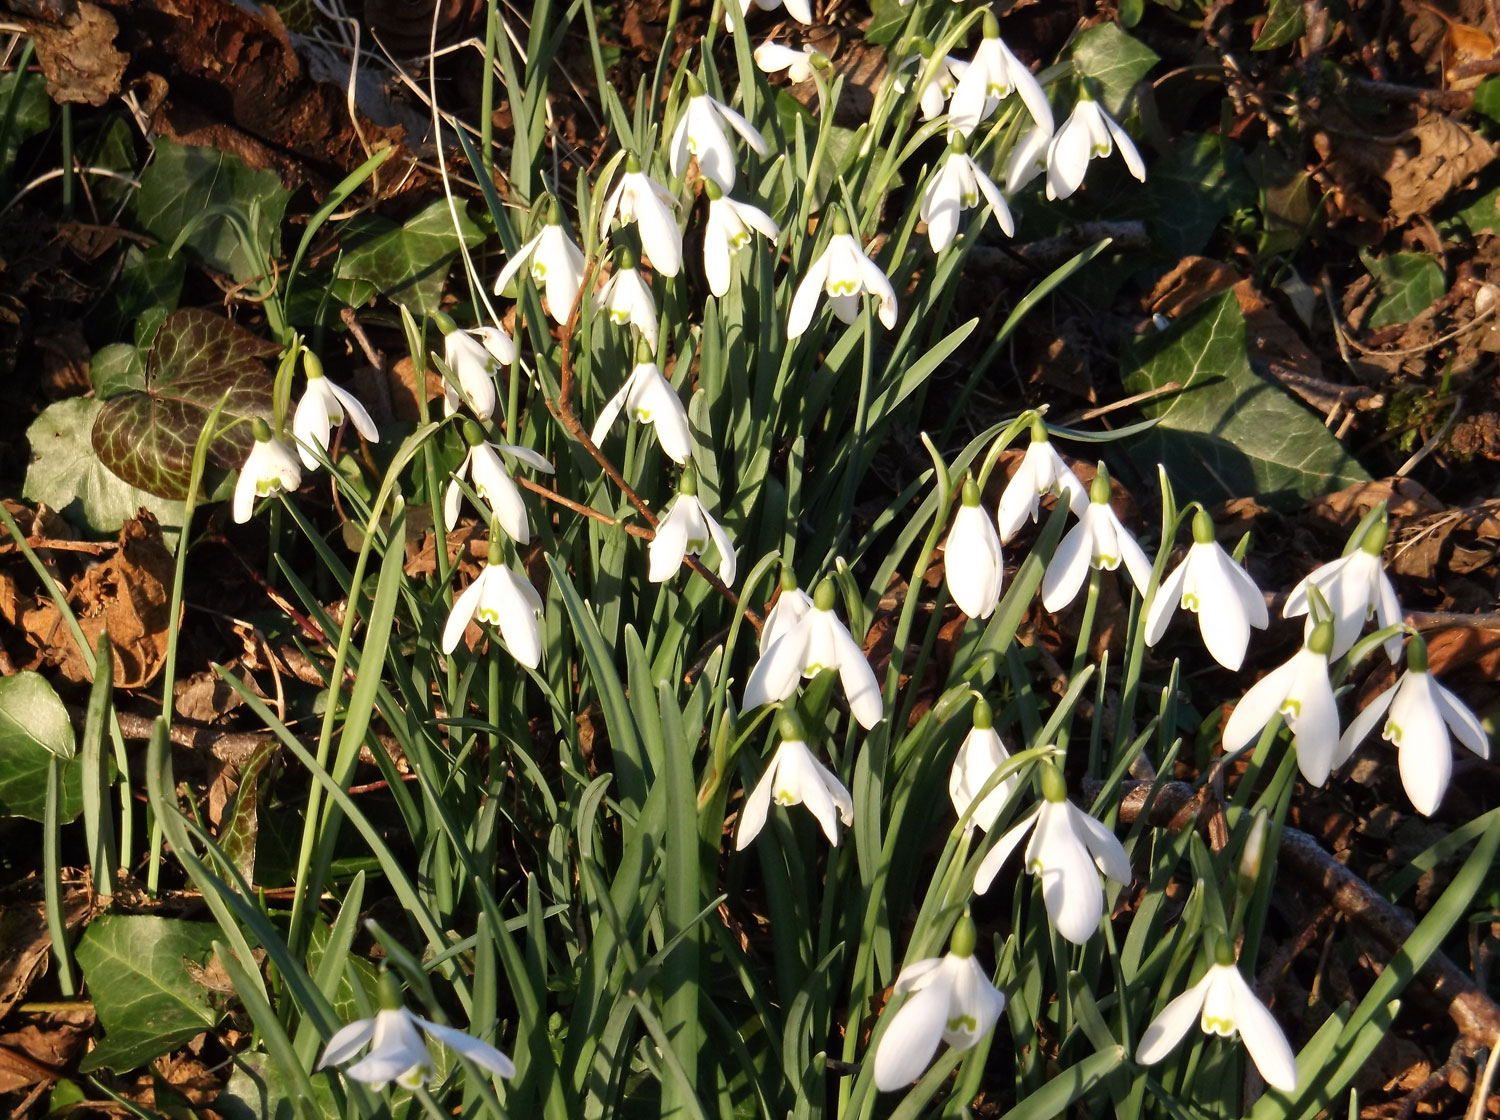 Snowdrops in the spring